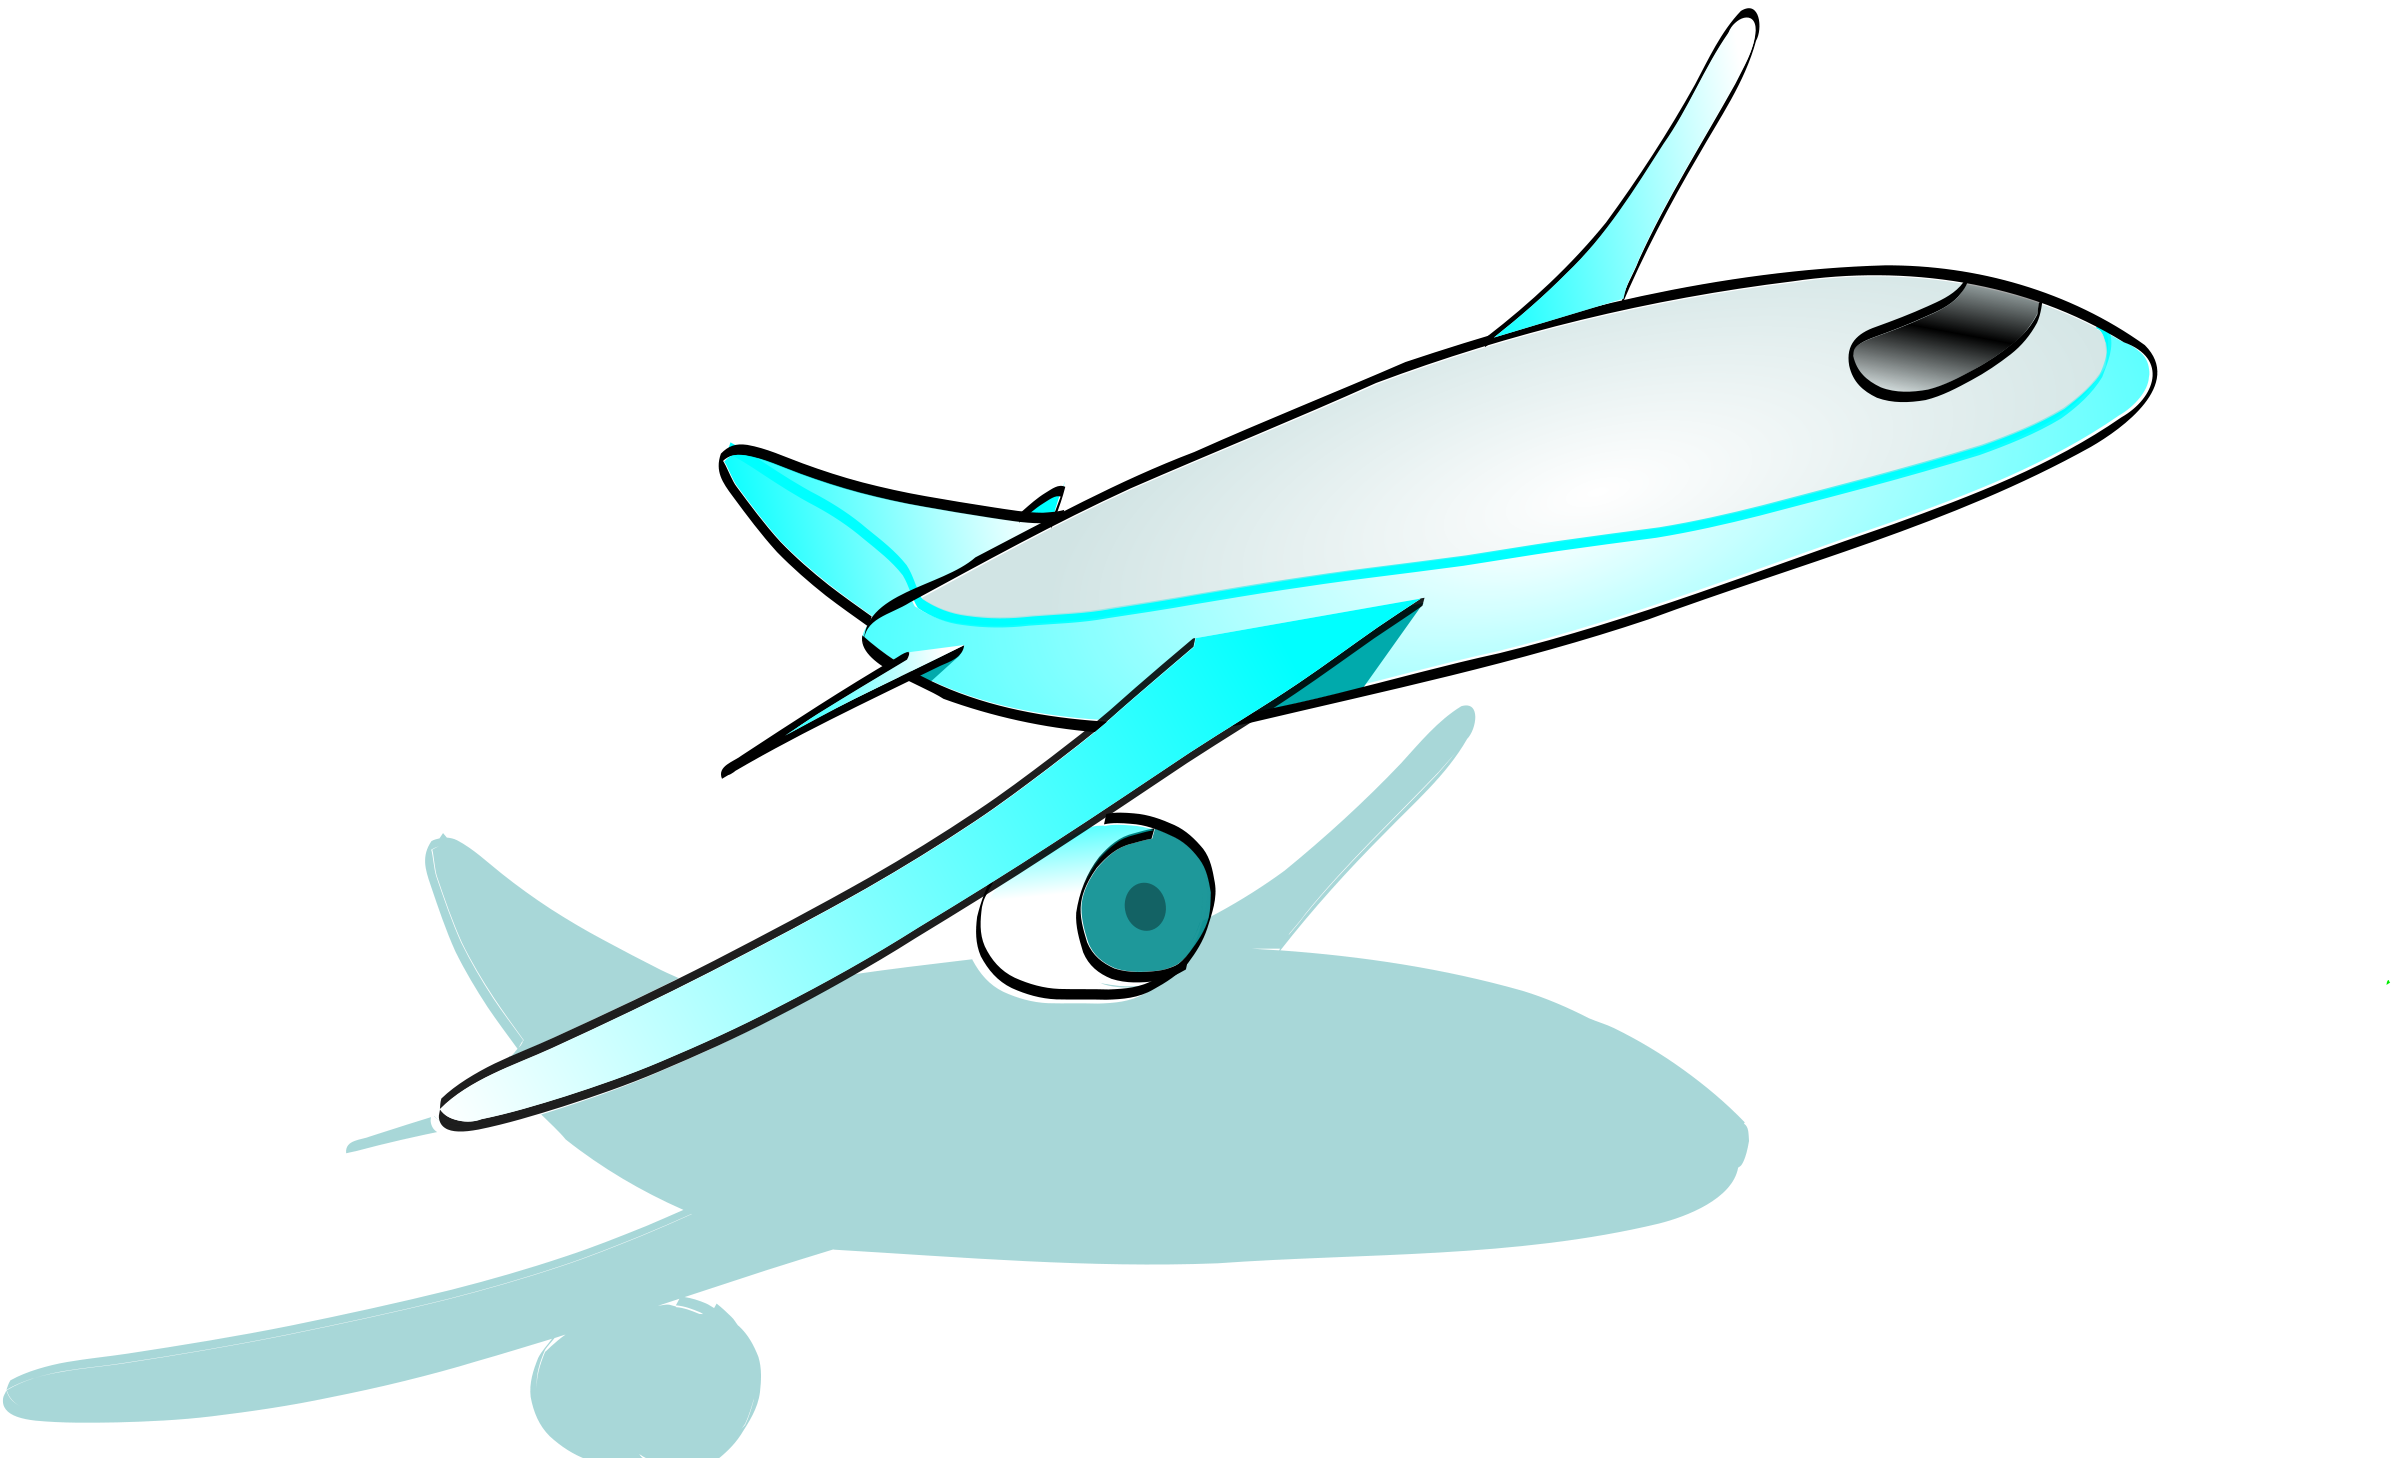 Top Of Airplane - ClipArt Best